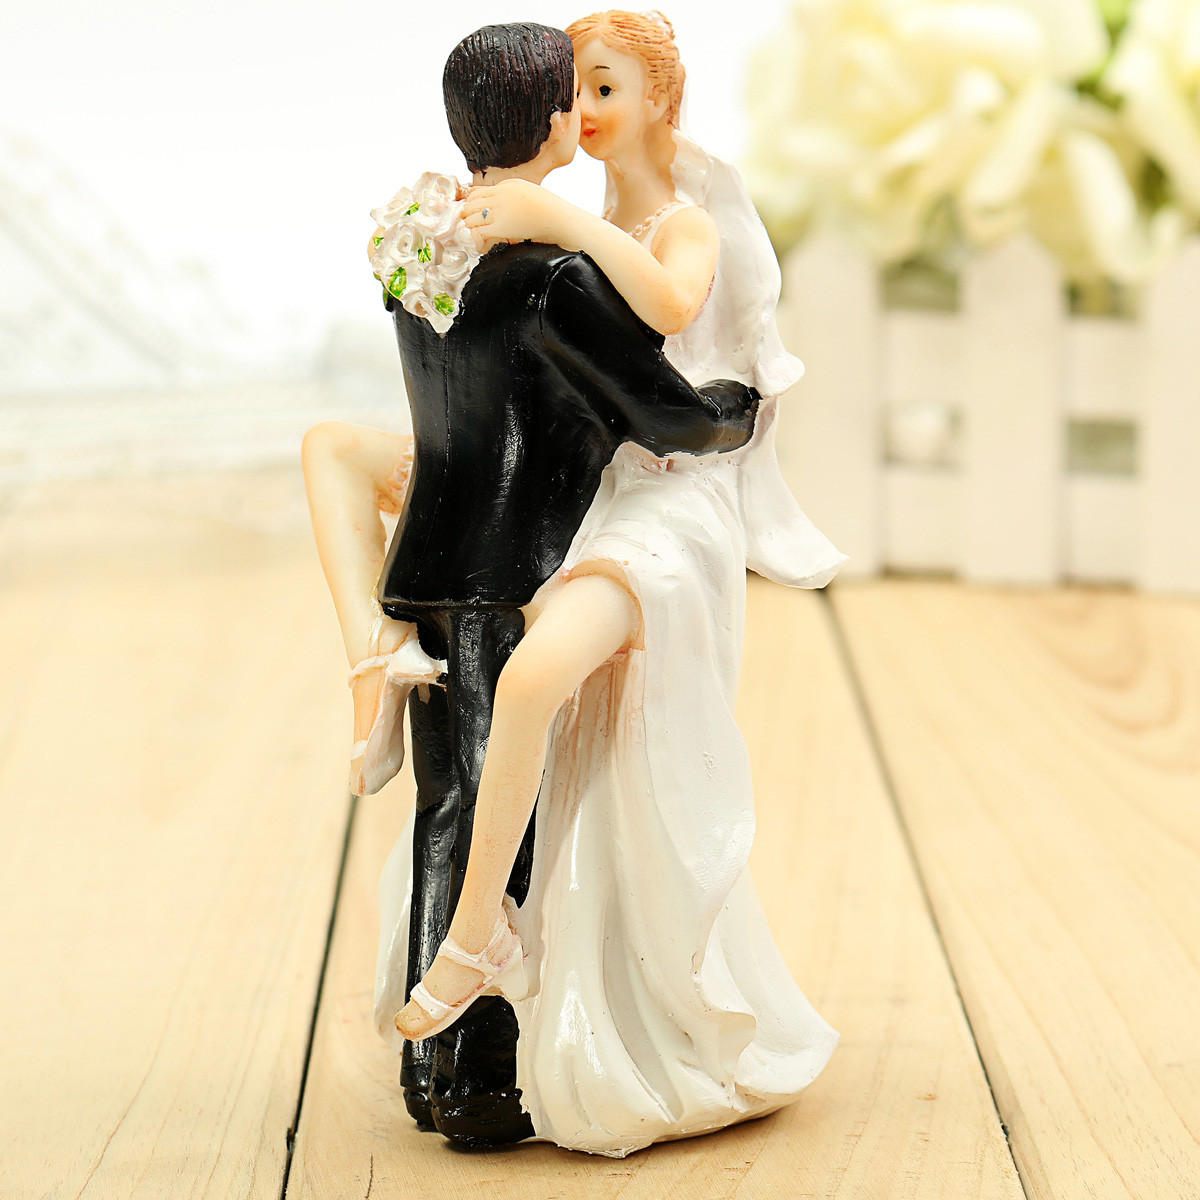 Wedding Cake Toppers Bride And Groom
 Bride Groom Resin Wedding Cake Topper Couple Figurine